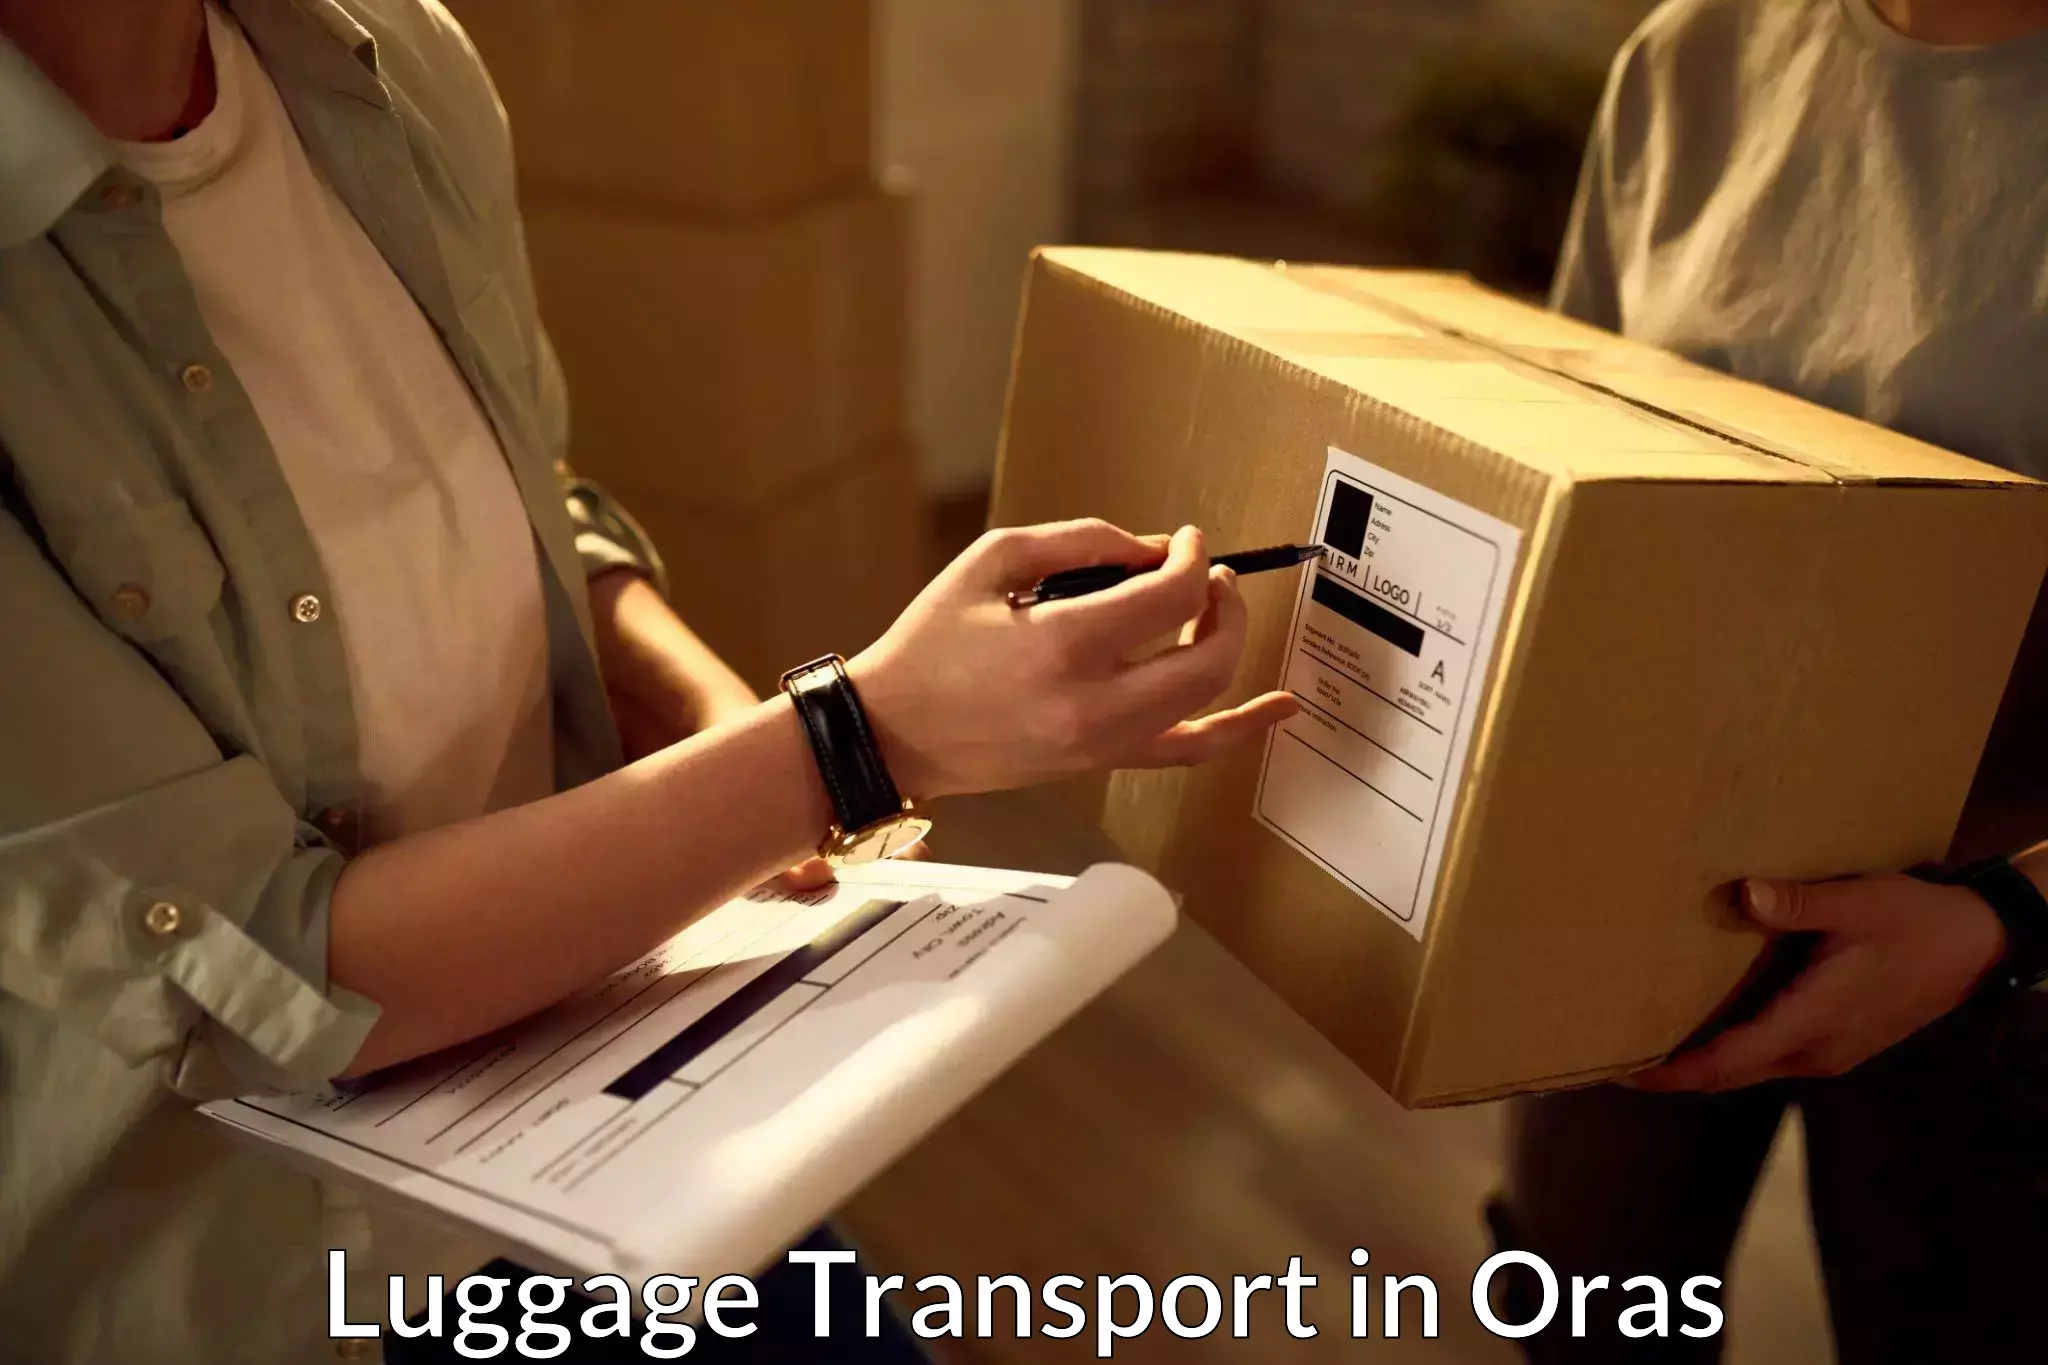 Nationwide luggage transport in Oras